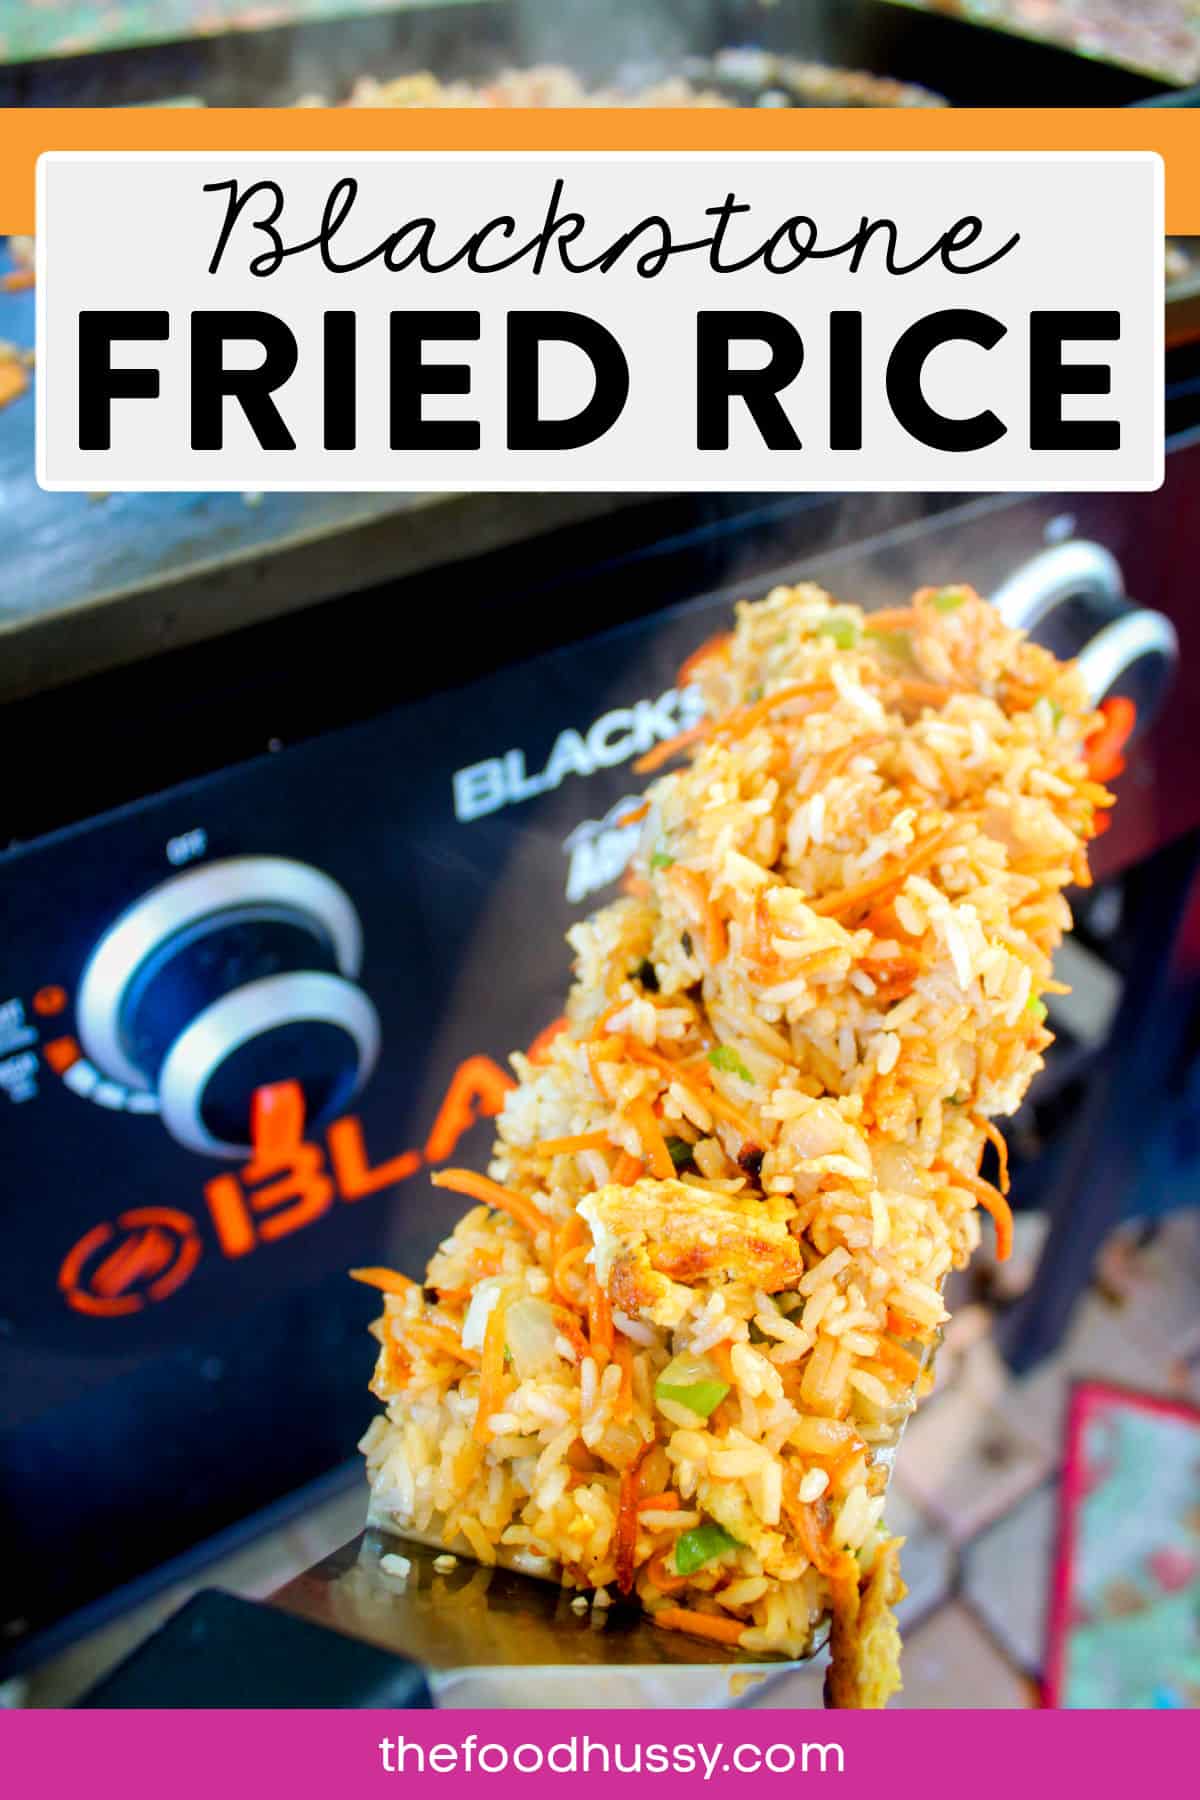 Making Fried Rice on the Blackstone is fun and delicious! Luckily - it's easy too! This fried rice tastes just like you get at your favorite hibachi or Chinese restaurant!   via @foodhussy